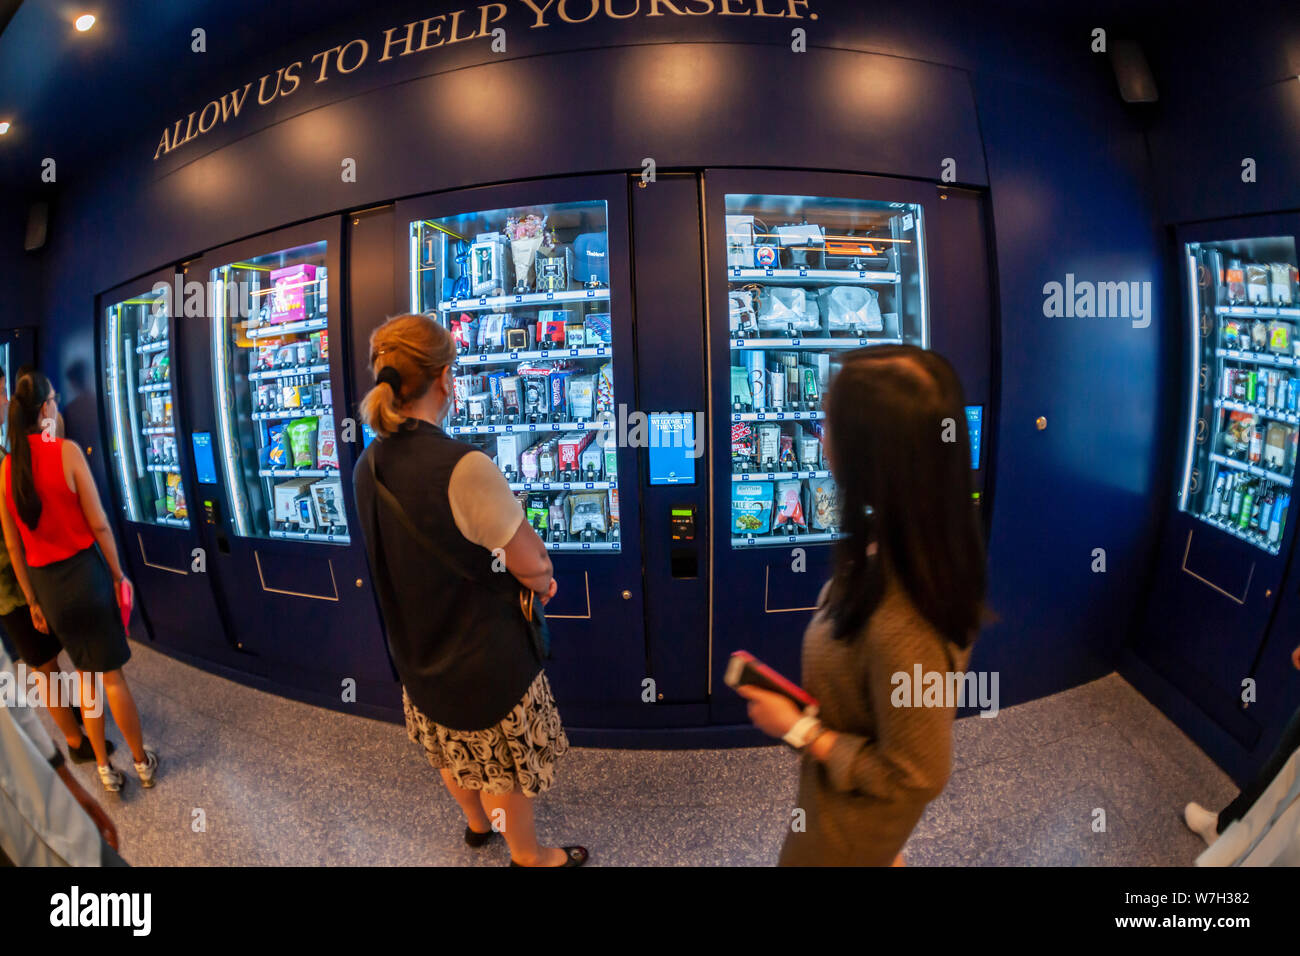 “The Vend” in Rockefeller Center in New York on its opening day, Tuesday, July 30, 2019. A product of Tishman-Speyer, the owners of Rockefeller Center, “The Vend”, installed in a vacant storefront on The Concourse, contains multiple vending machines selling everything from drinks, to Brooks Brothers shirts to a diamond engagement ring. (© Richard B. Levine) Stock Photo